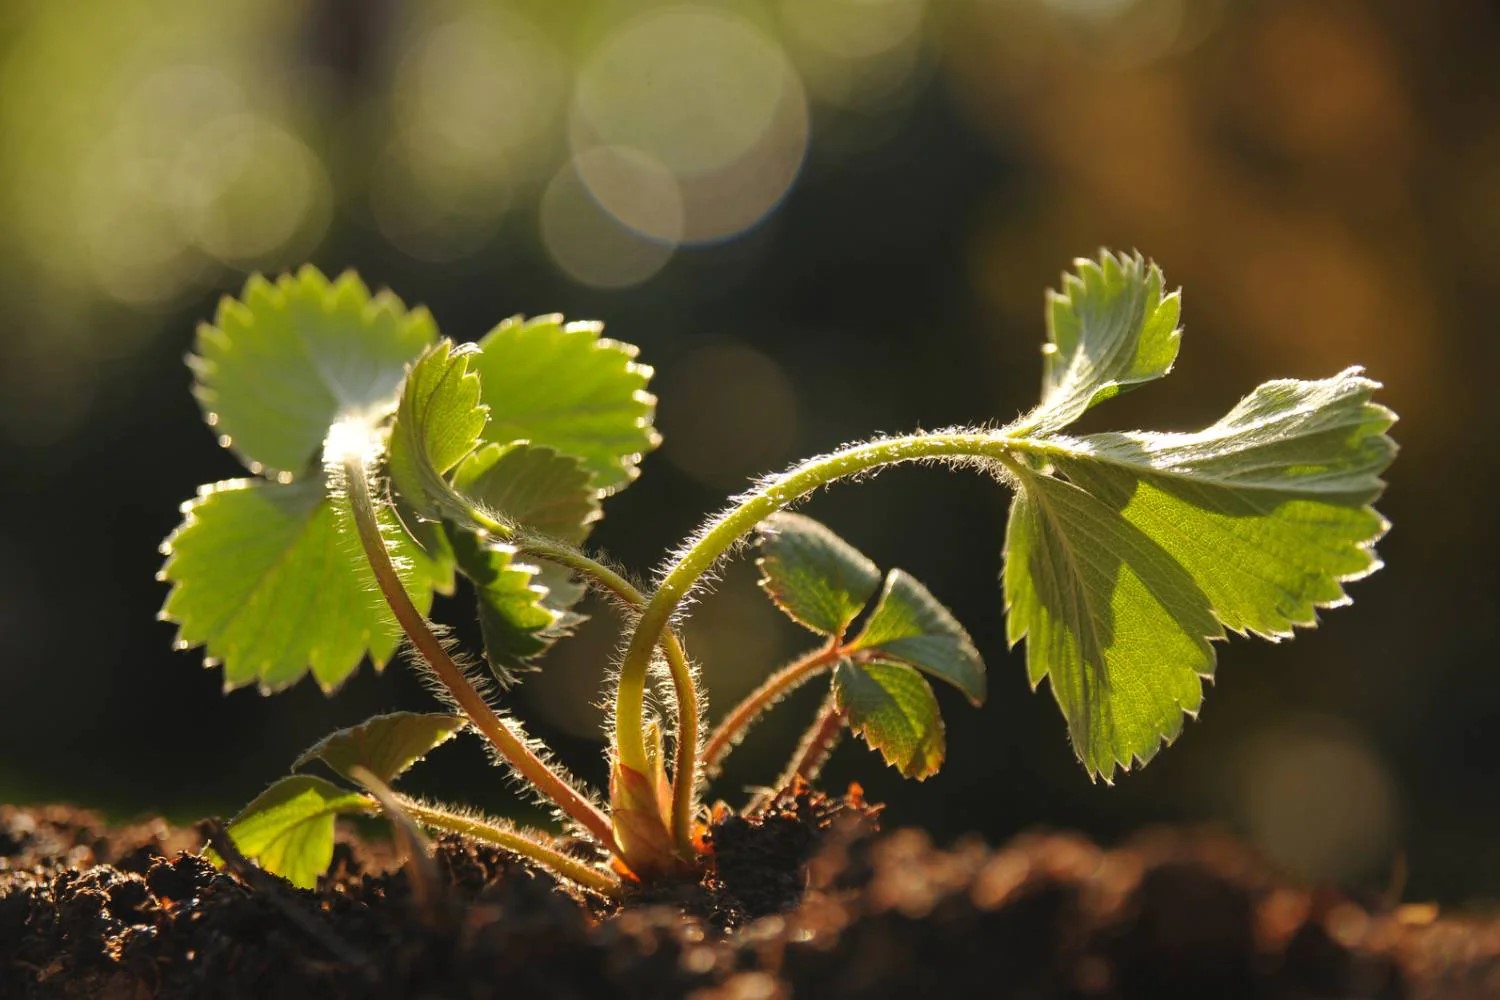 How To Plant Strawberries From Seed